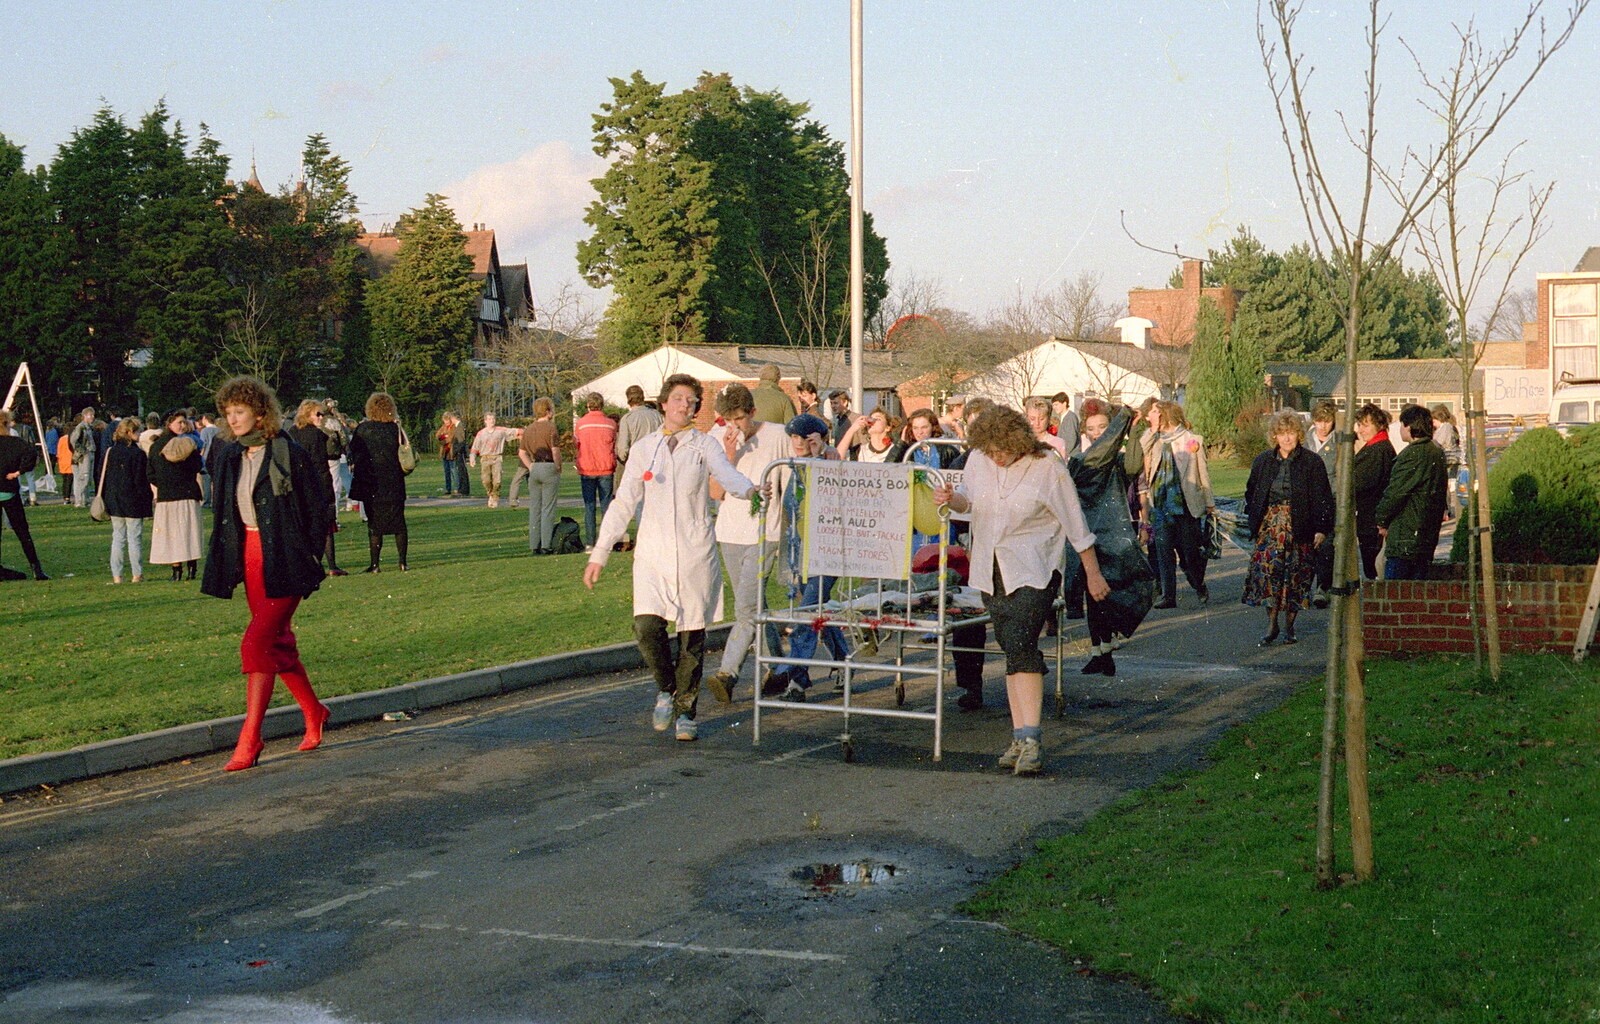 The Bed Push returns to Brock College from The Last Day of Term, and Leaving New Milton, Hampshire - 18th September 1985